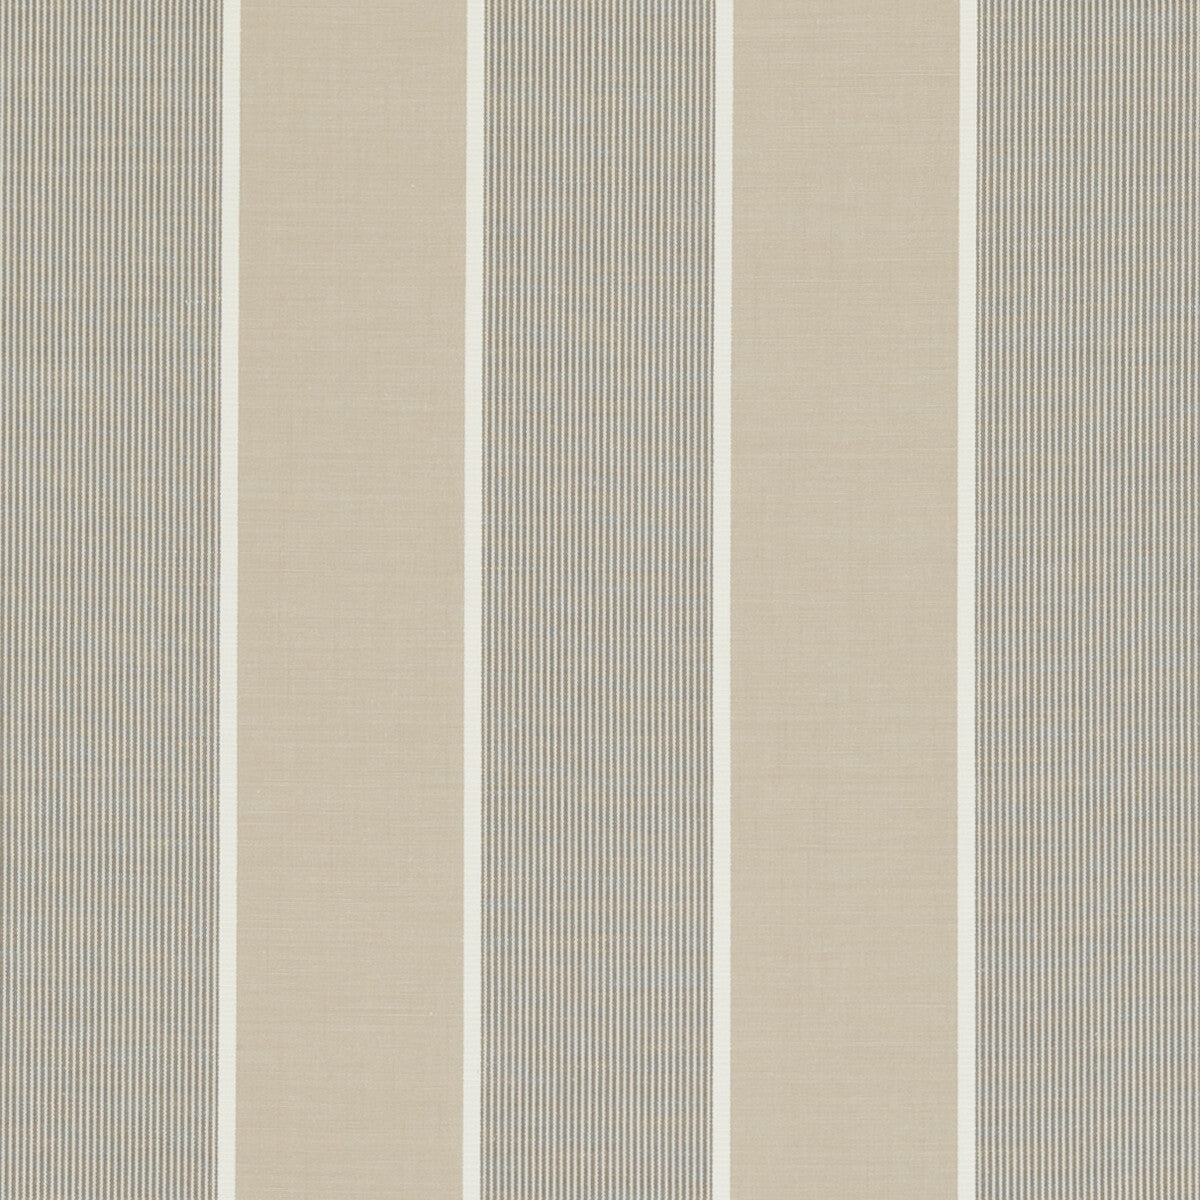 Chatburn fabric in natural color - pattern F0597/04.CAC.0 - by Clarke And Clarke in the Clarke &amp; Clarke Ribble Valley collection